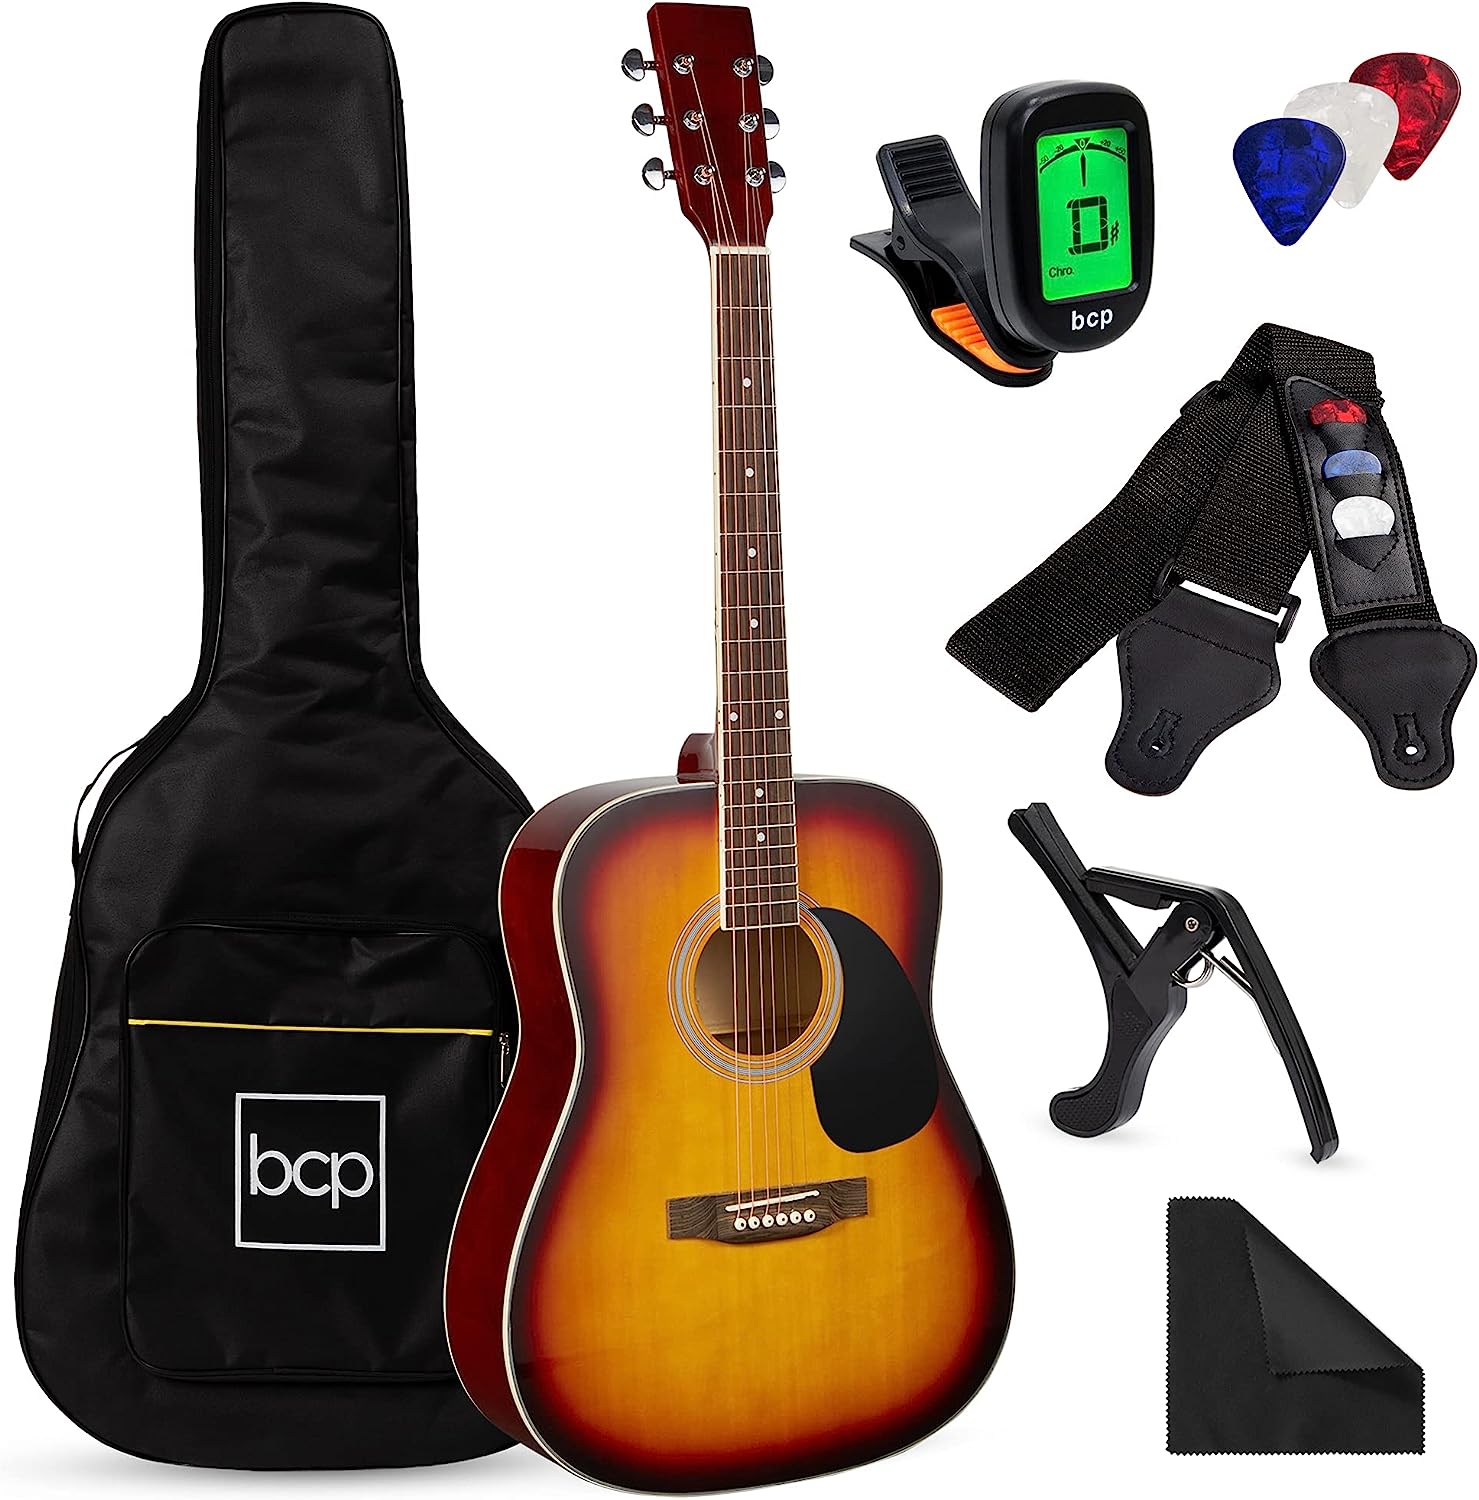 BCP Acoustic Guitar Bundle on a white background